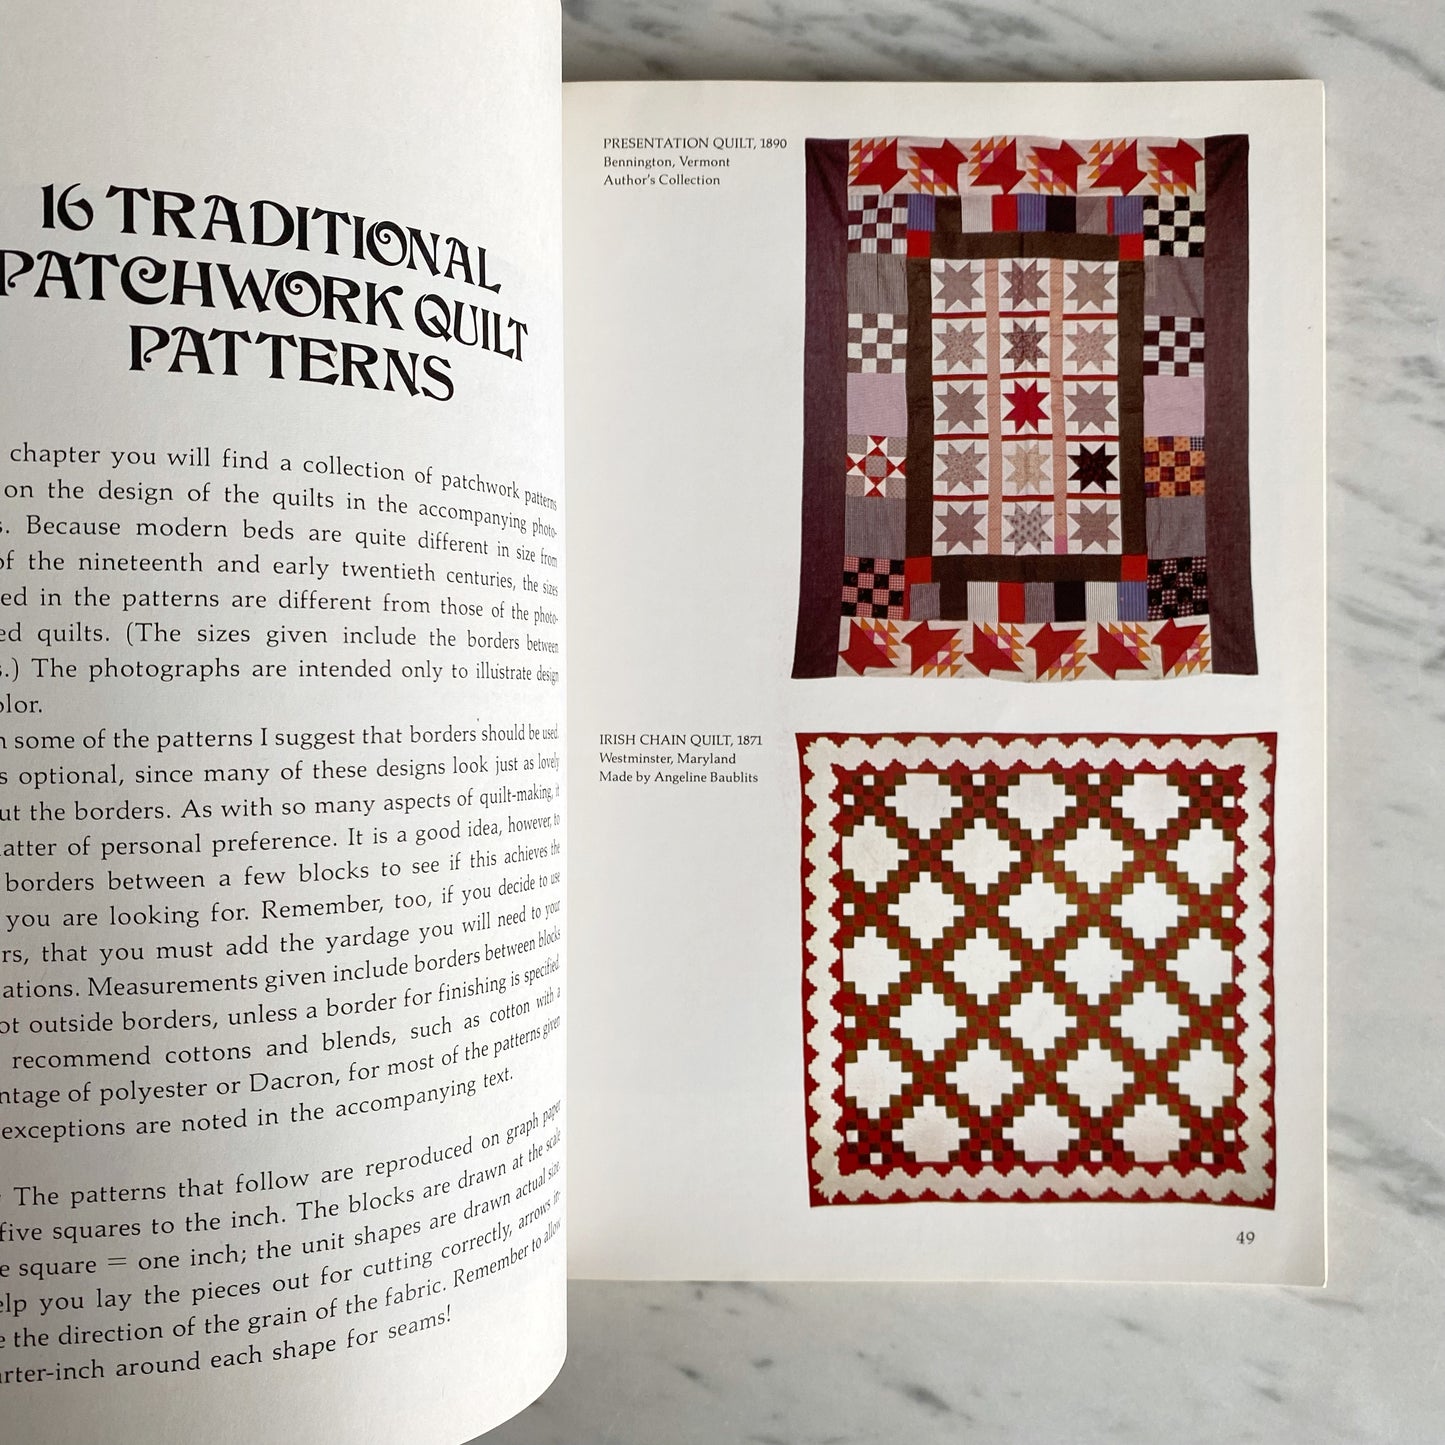 Book: Once Upon a Quilt (1973)